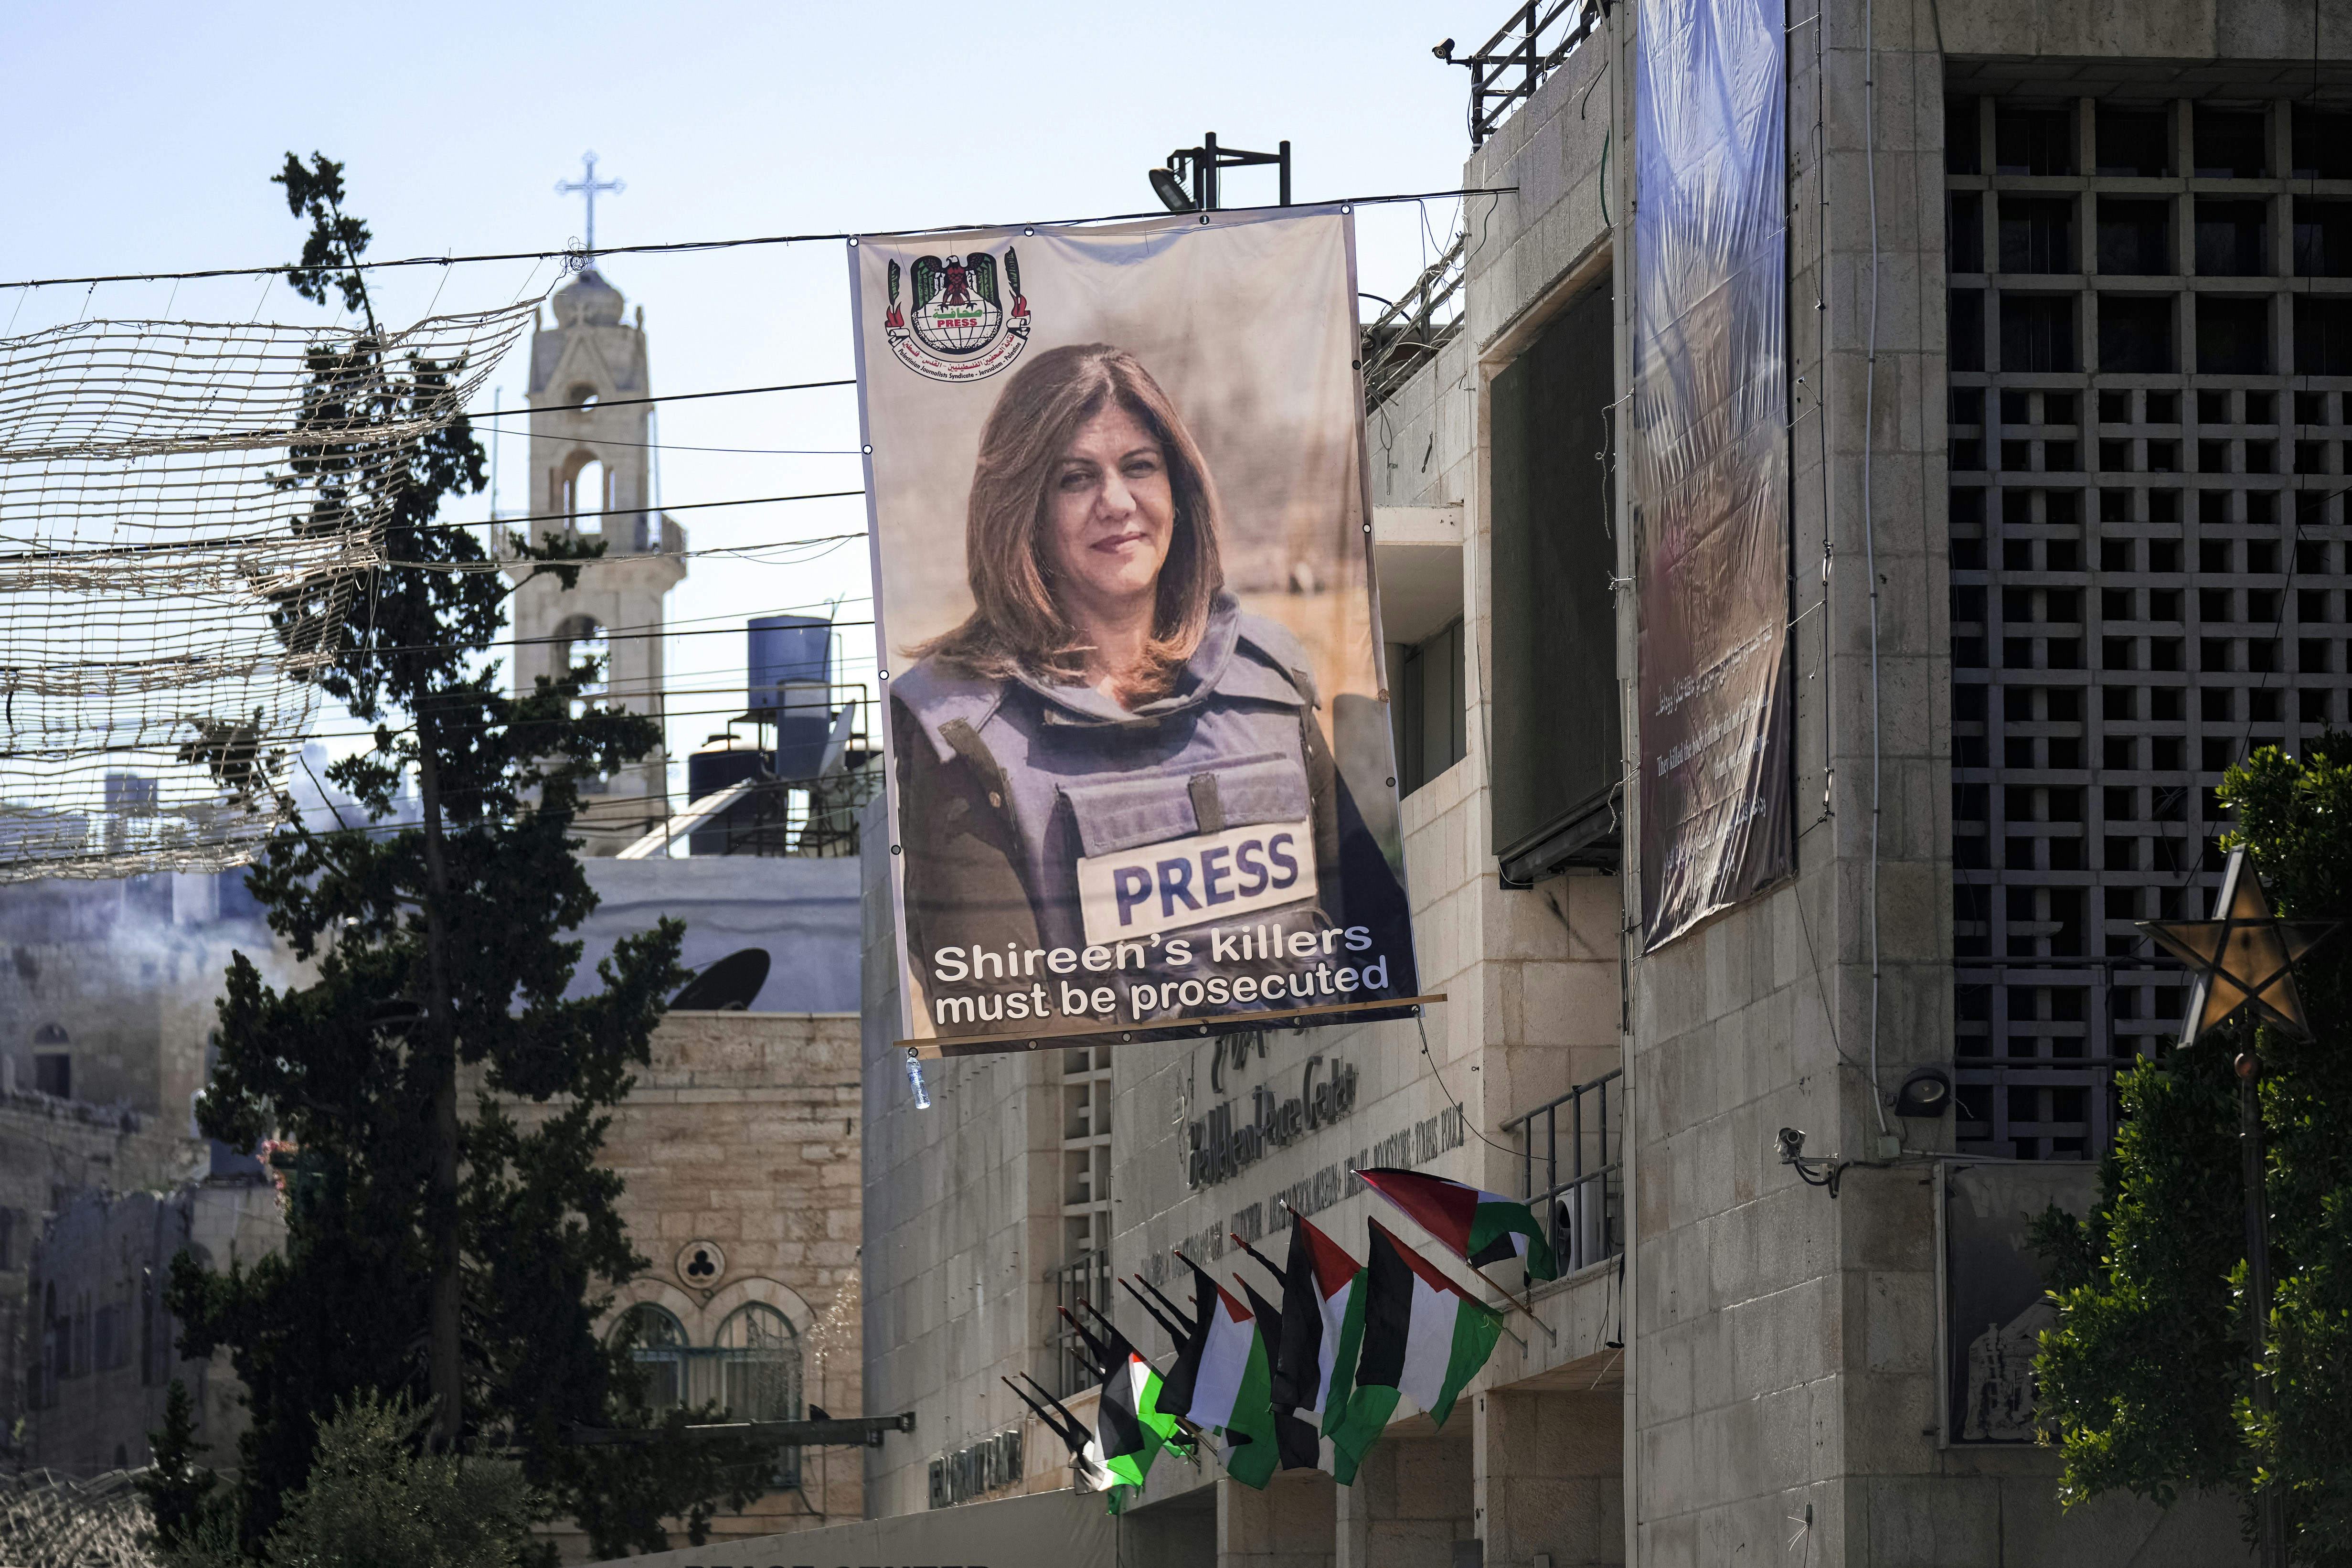 Banners with pictures of the slain Palestinian-American journalist Shireen Abu Akleh are displayed on the Bethlehem Peace Center, ahead of the visit of U.S. President Joe Biden to the West Bank, near the Church of the Nativity, traditionally believed to be the birthplace of Jesus Christ, in the West Bank town of Bethlehem, Thursday, July 14, 2022. On Friday Biden will meet with Palestinian President Mahmoud Abbas in Bethlehem. (AP Photo/Majdi Mohammed)